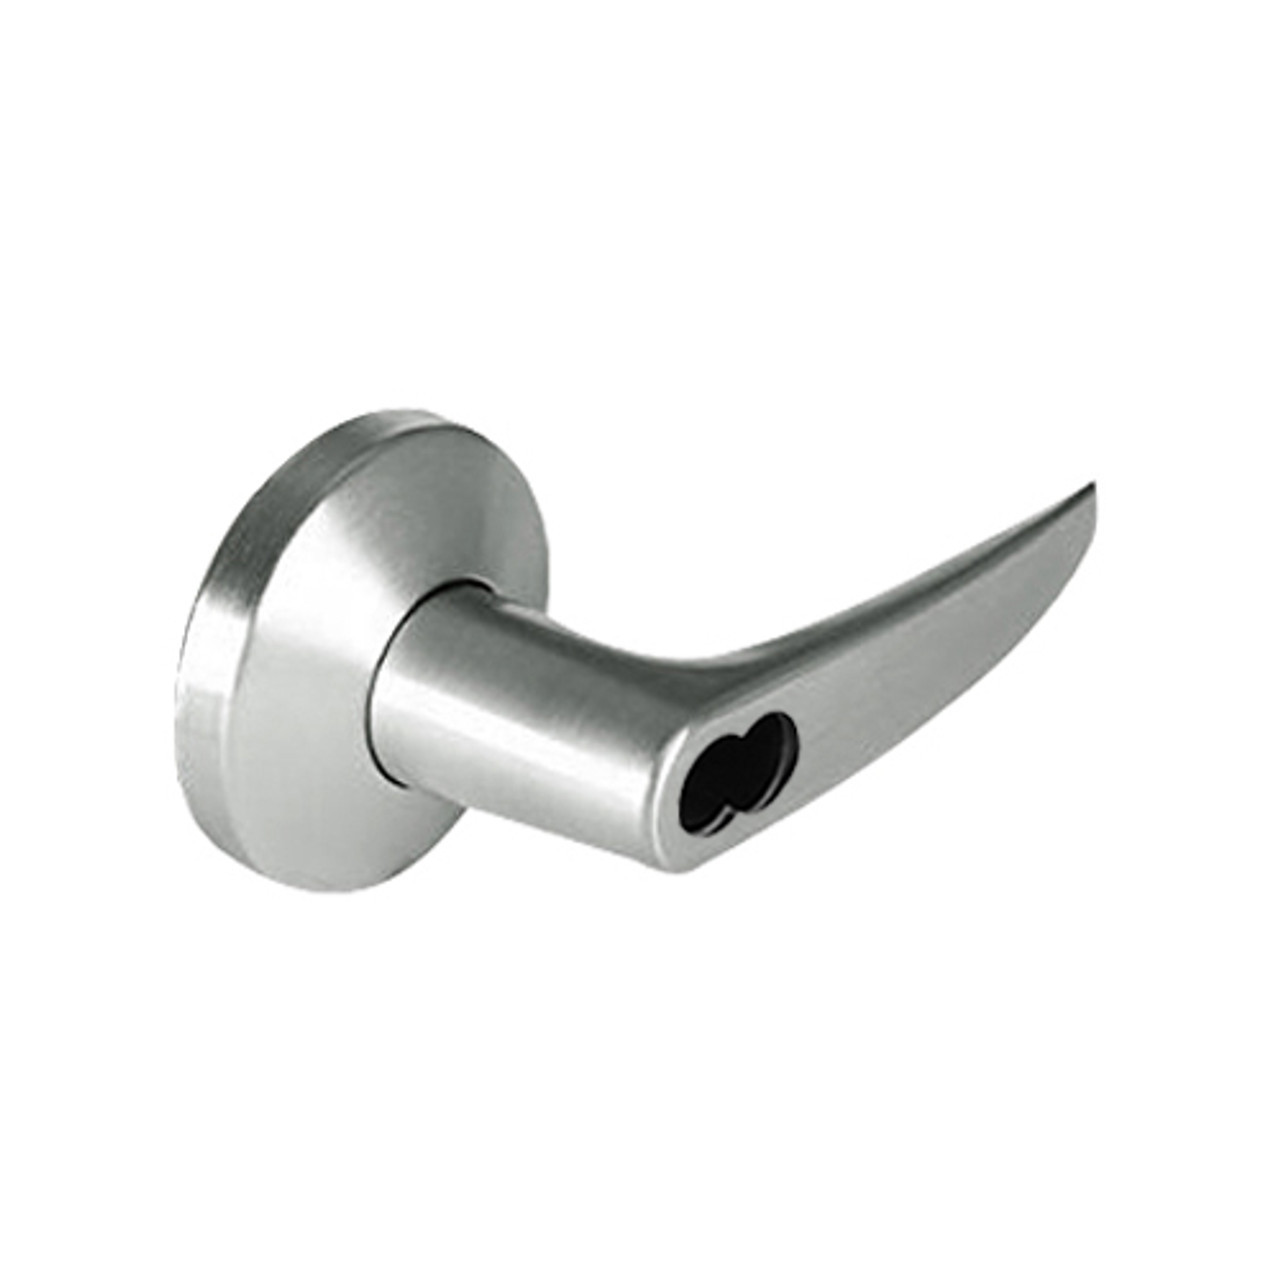 9K37DR16KSTK619LM Best 9K Series Special Function Cylindrical Lever Locks with Curved without Return Lever Design Accept 7 Pin Best Core in Satin Nickel